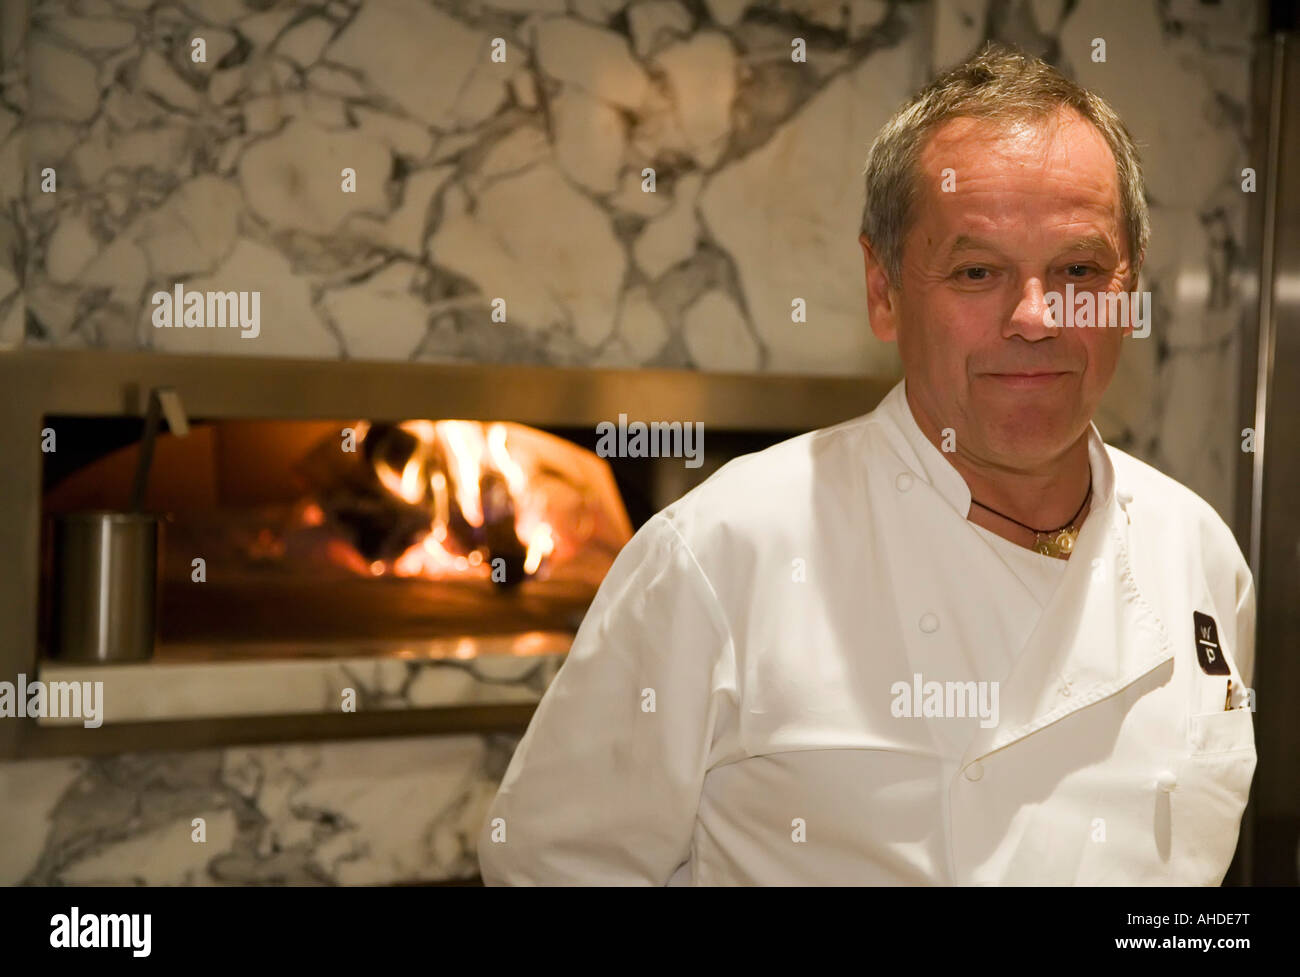 Detroit Michigan Celebrity chef Wolfgang Puck at the Wolfgang Puck Grille in the MGM Grand casino Stock Photo